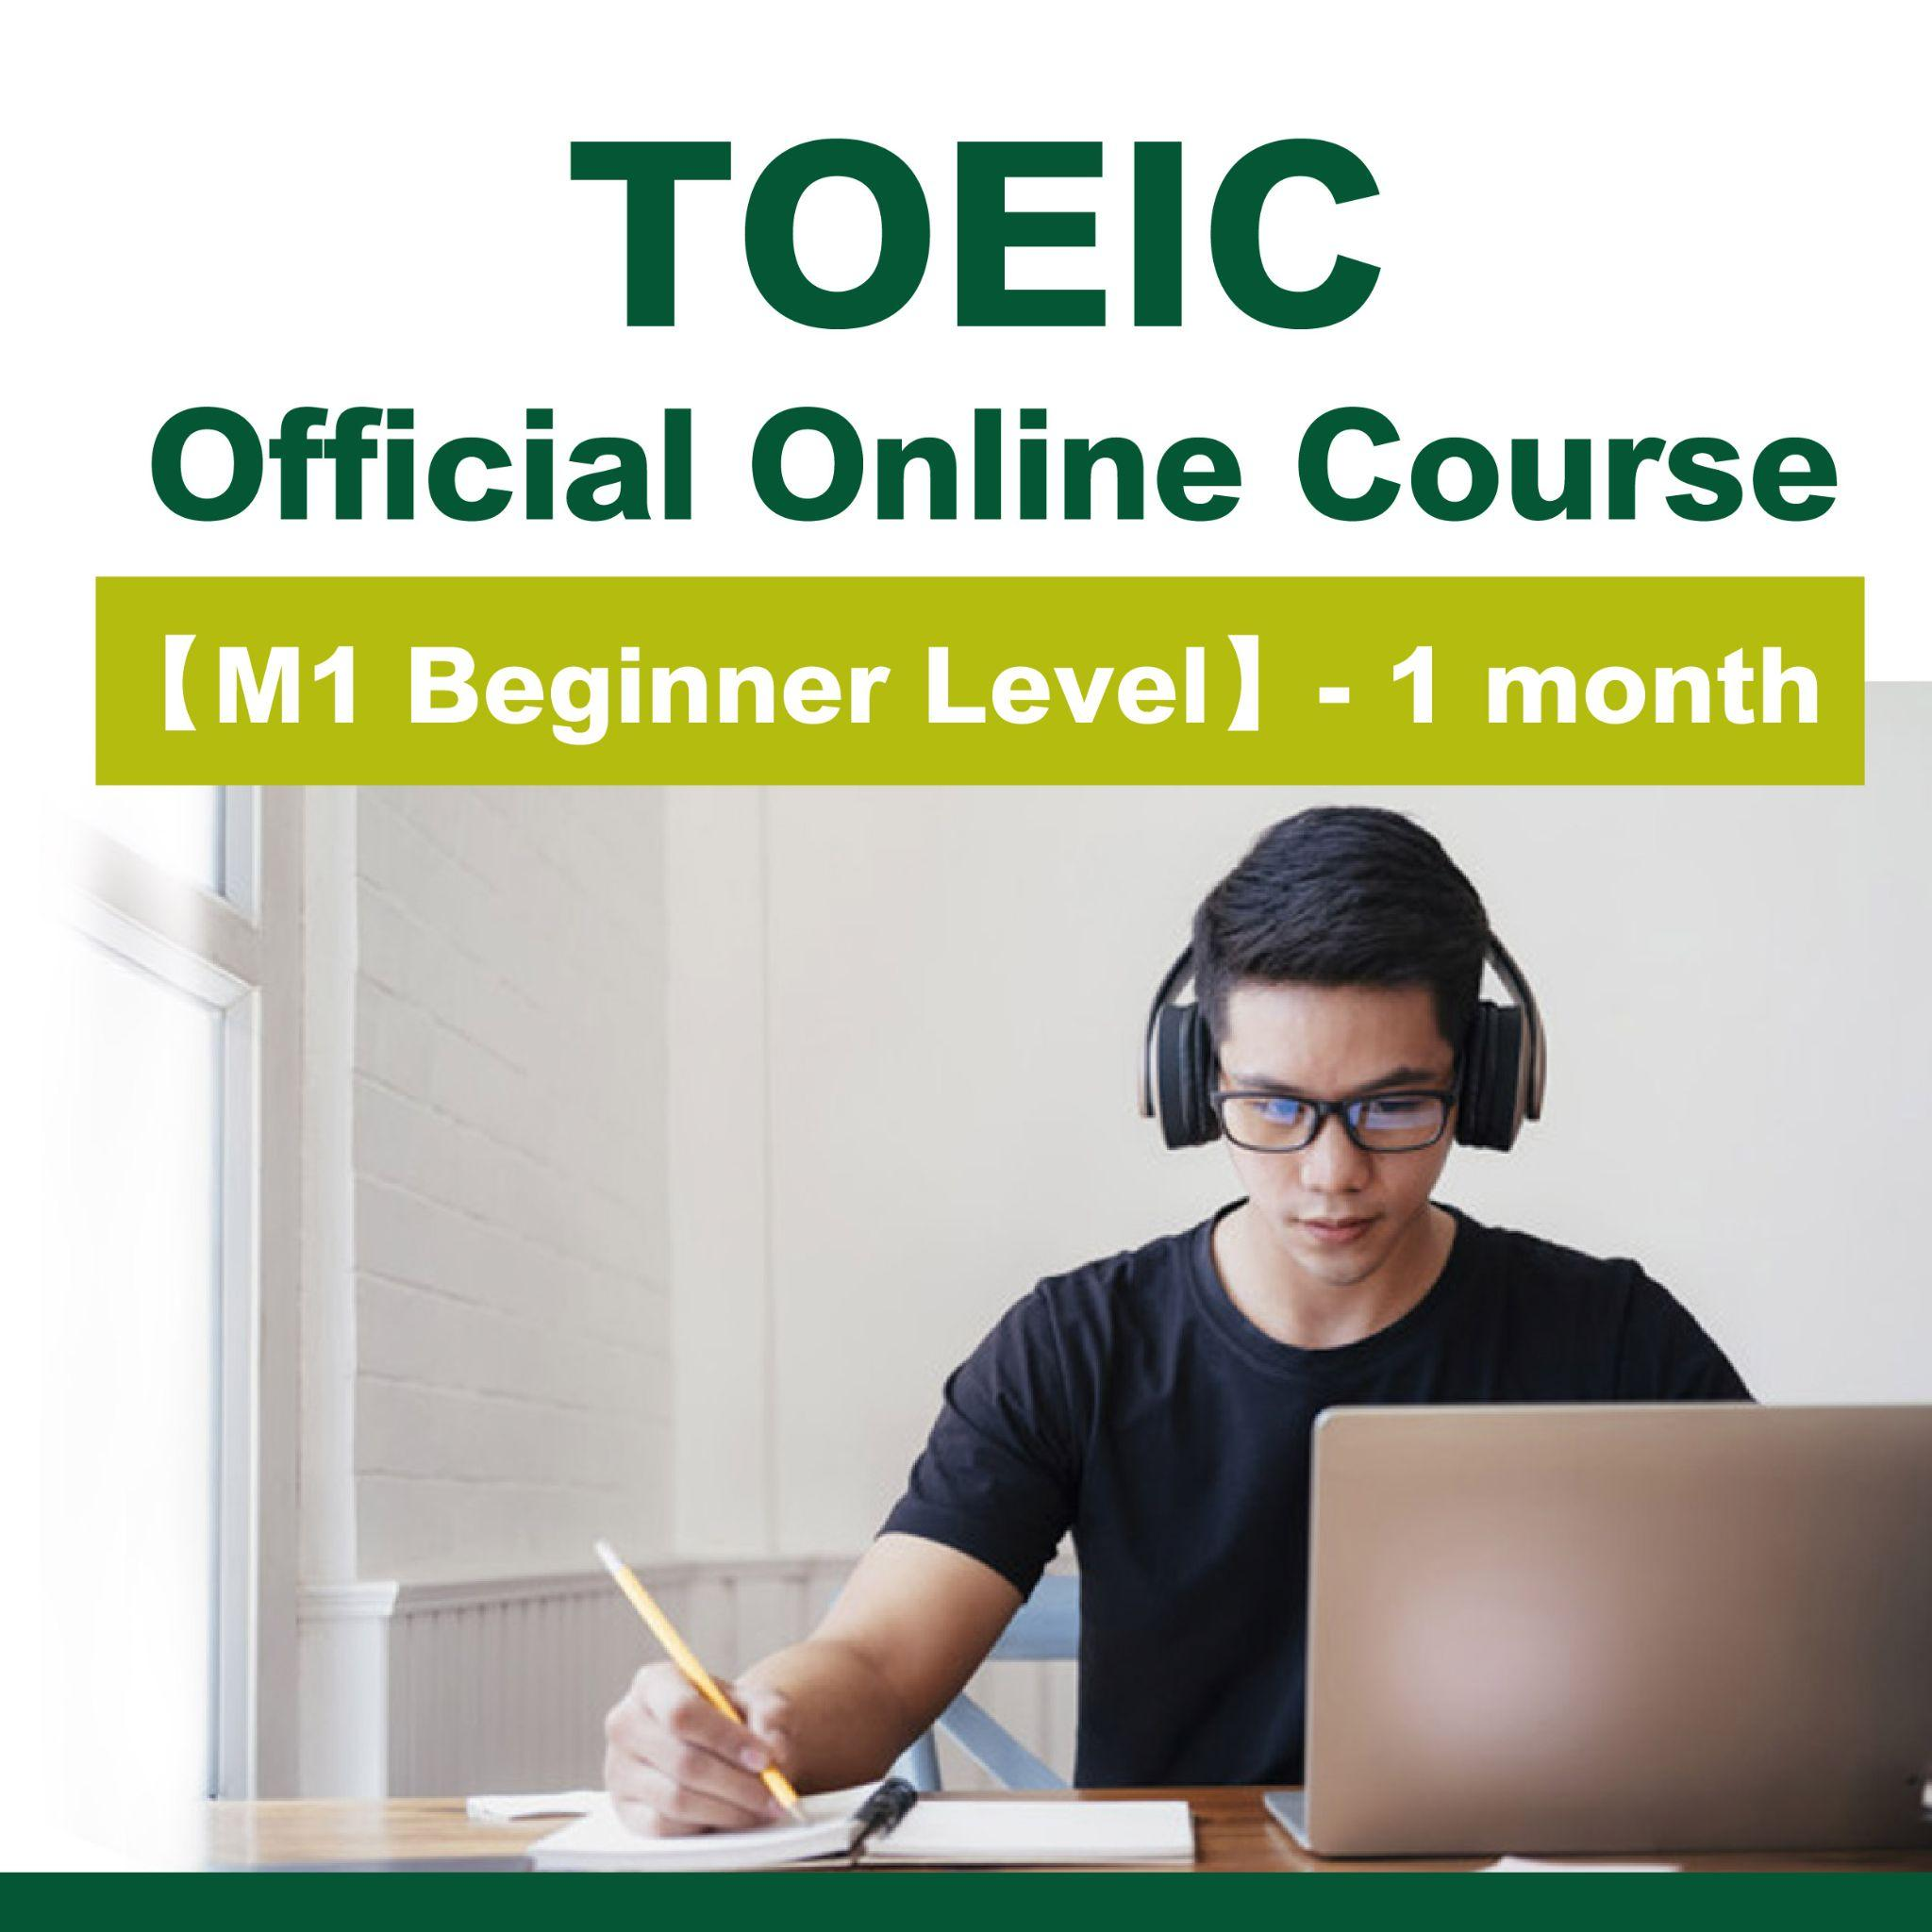 TOEIC Official Online Course 【M1 Beginner Level】1 month